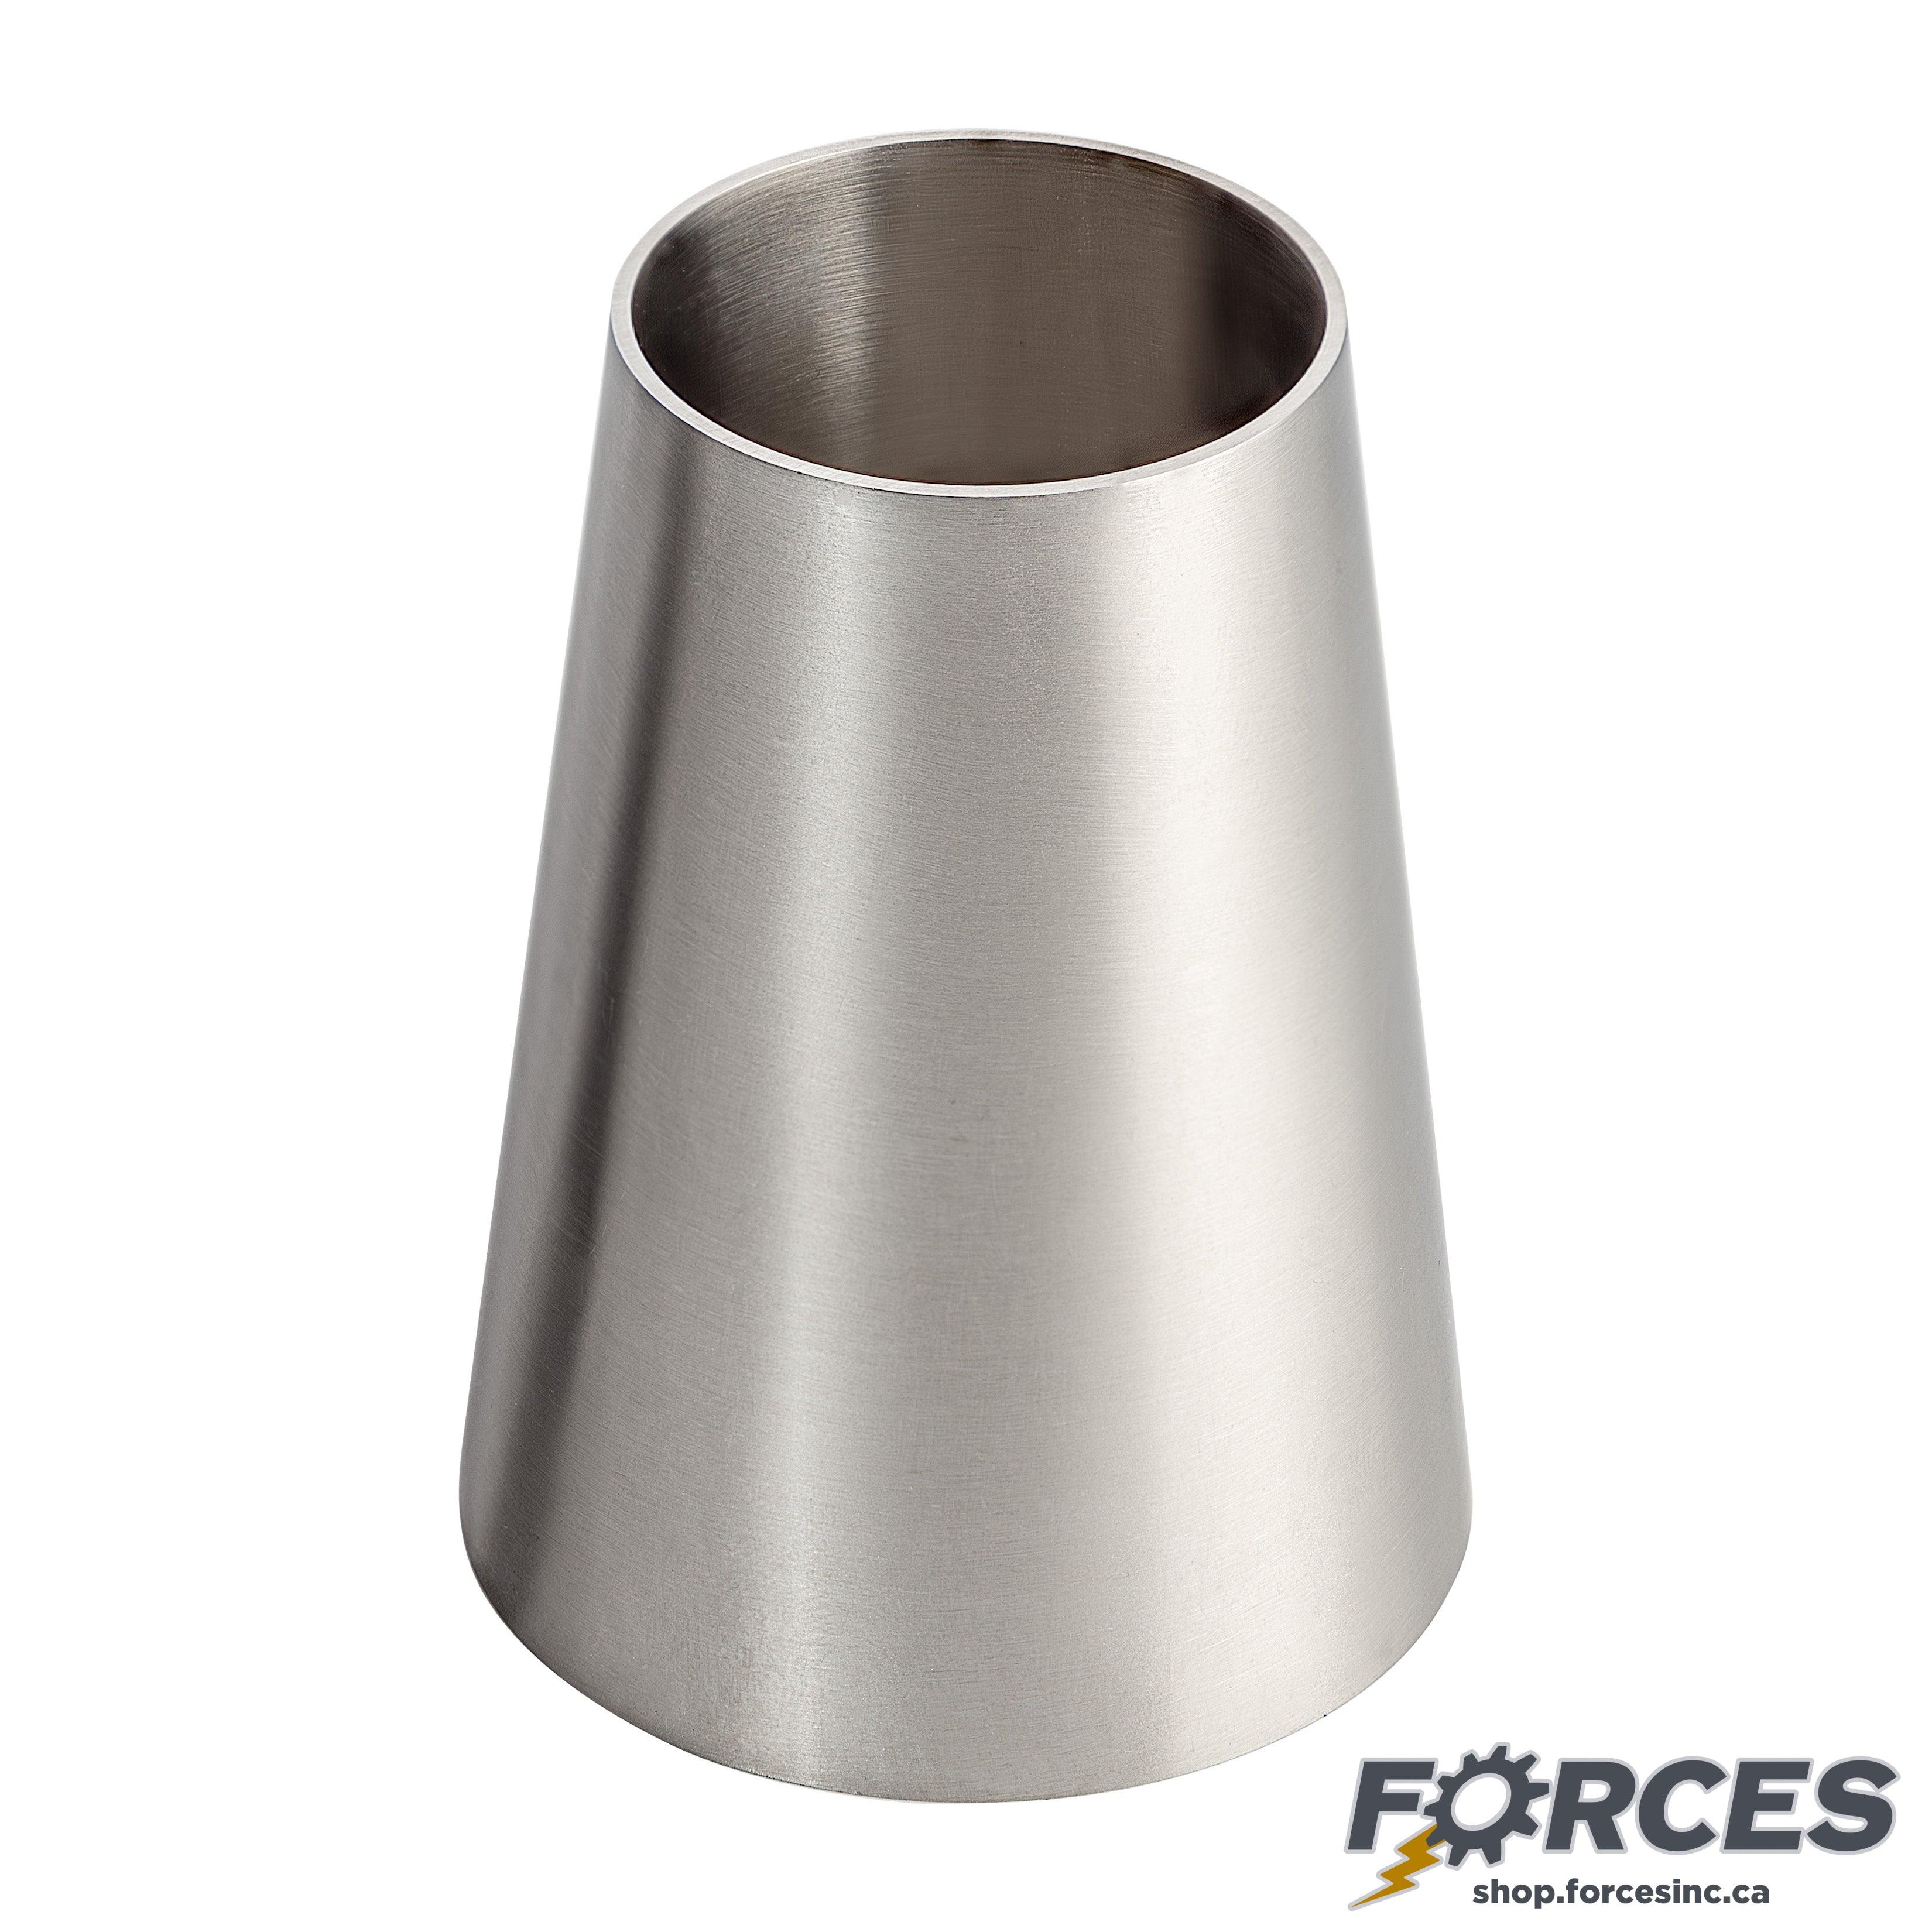 2-1/2" x 1-1/2" Butt Weld Concentric Reducer - Stainless Steel 304 - Forces Inc